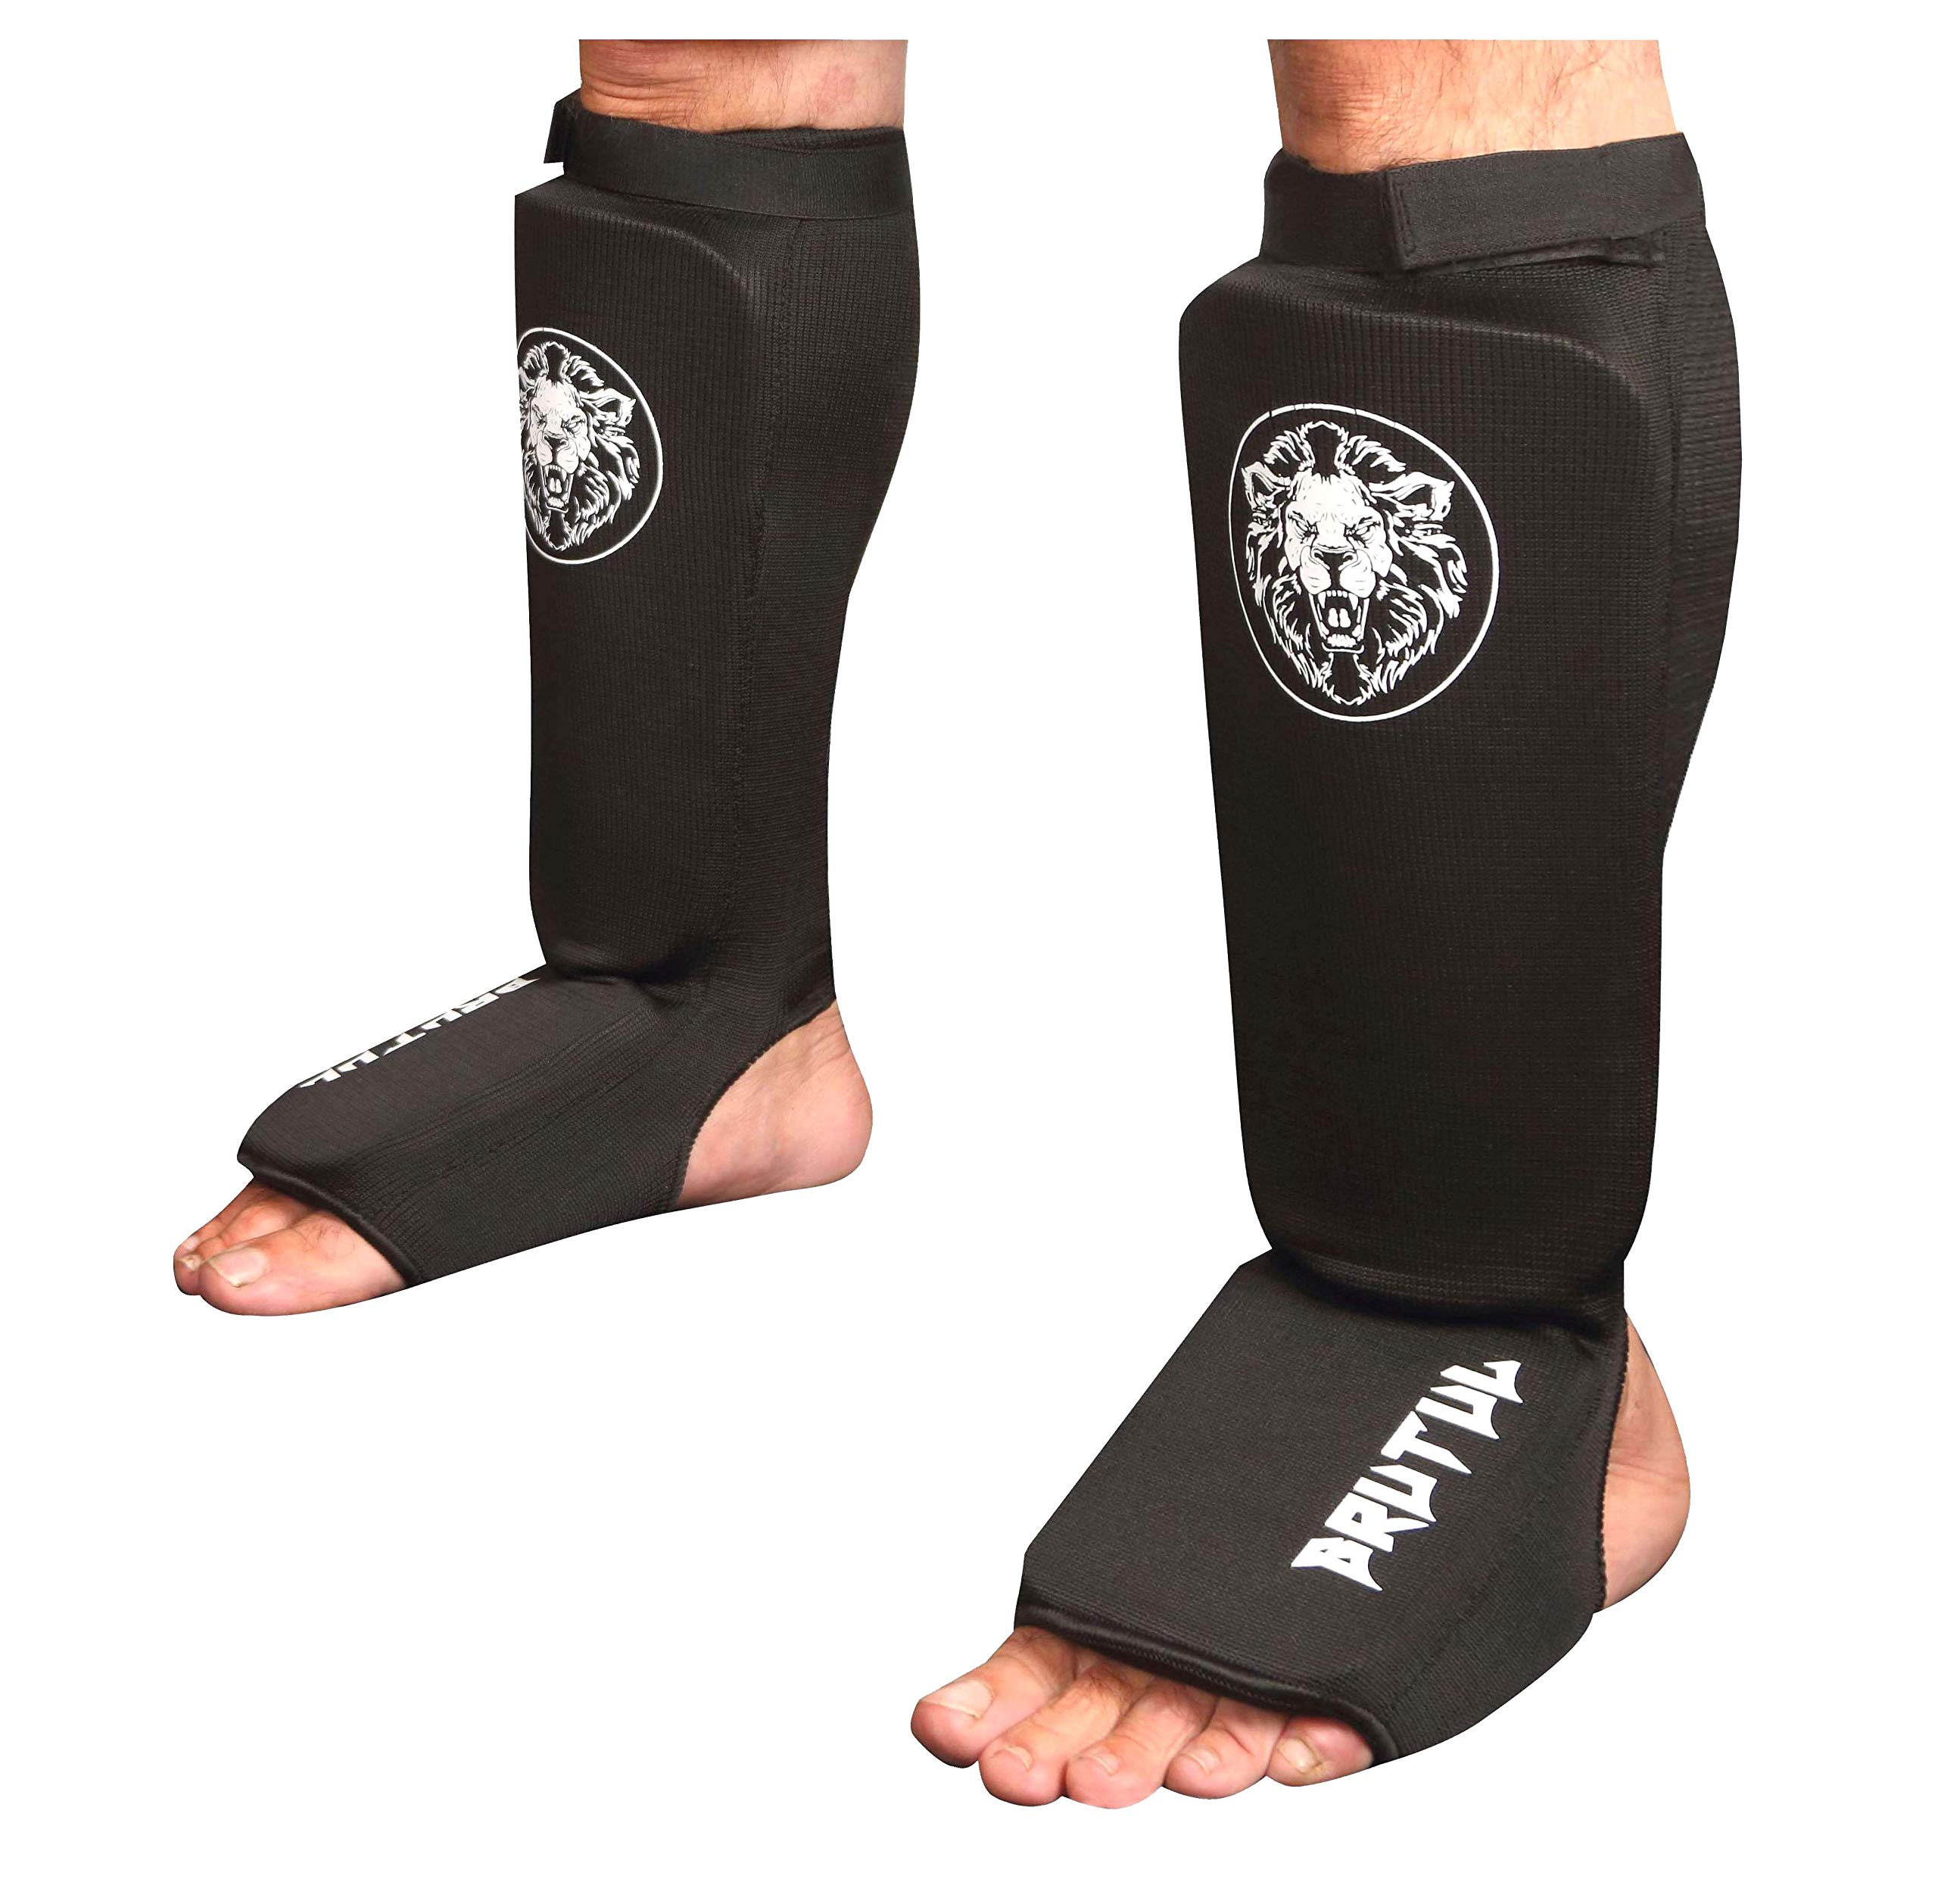 Protective Pants For Taekwondo, Karate, Muay Thai, MMA, Kickboxing Instep  Guard With Sparring Leg Kick Pads For AKU239R From Db56, $19.84